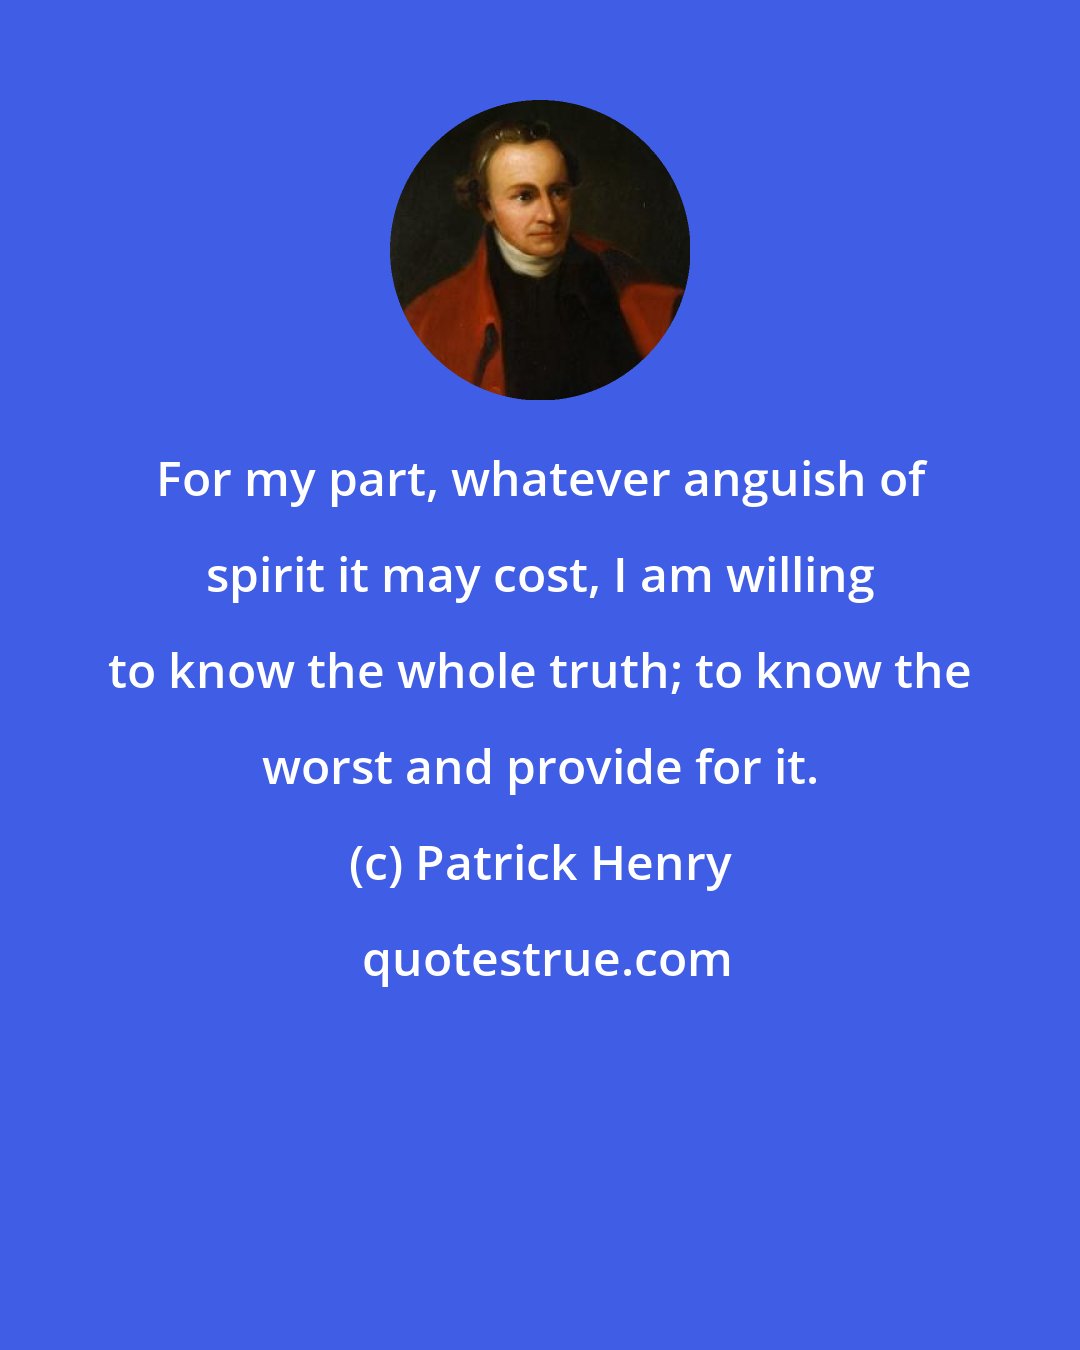 Patrick Henry: For my part, whatever anguish of spirit it may cost, I am willing to know the whole truth; to know the worst and provide for it.